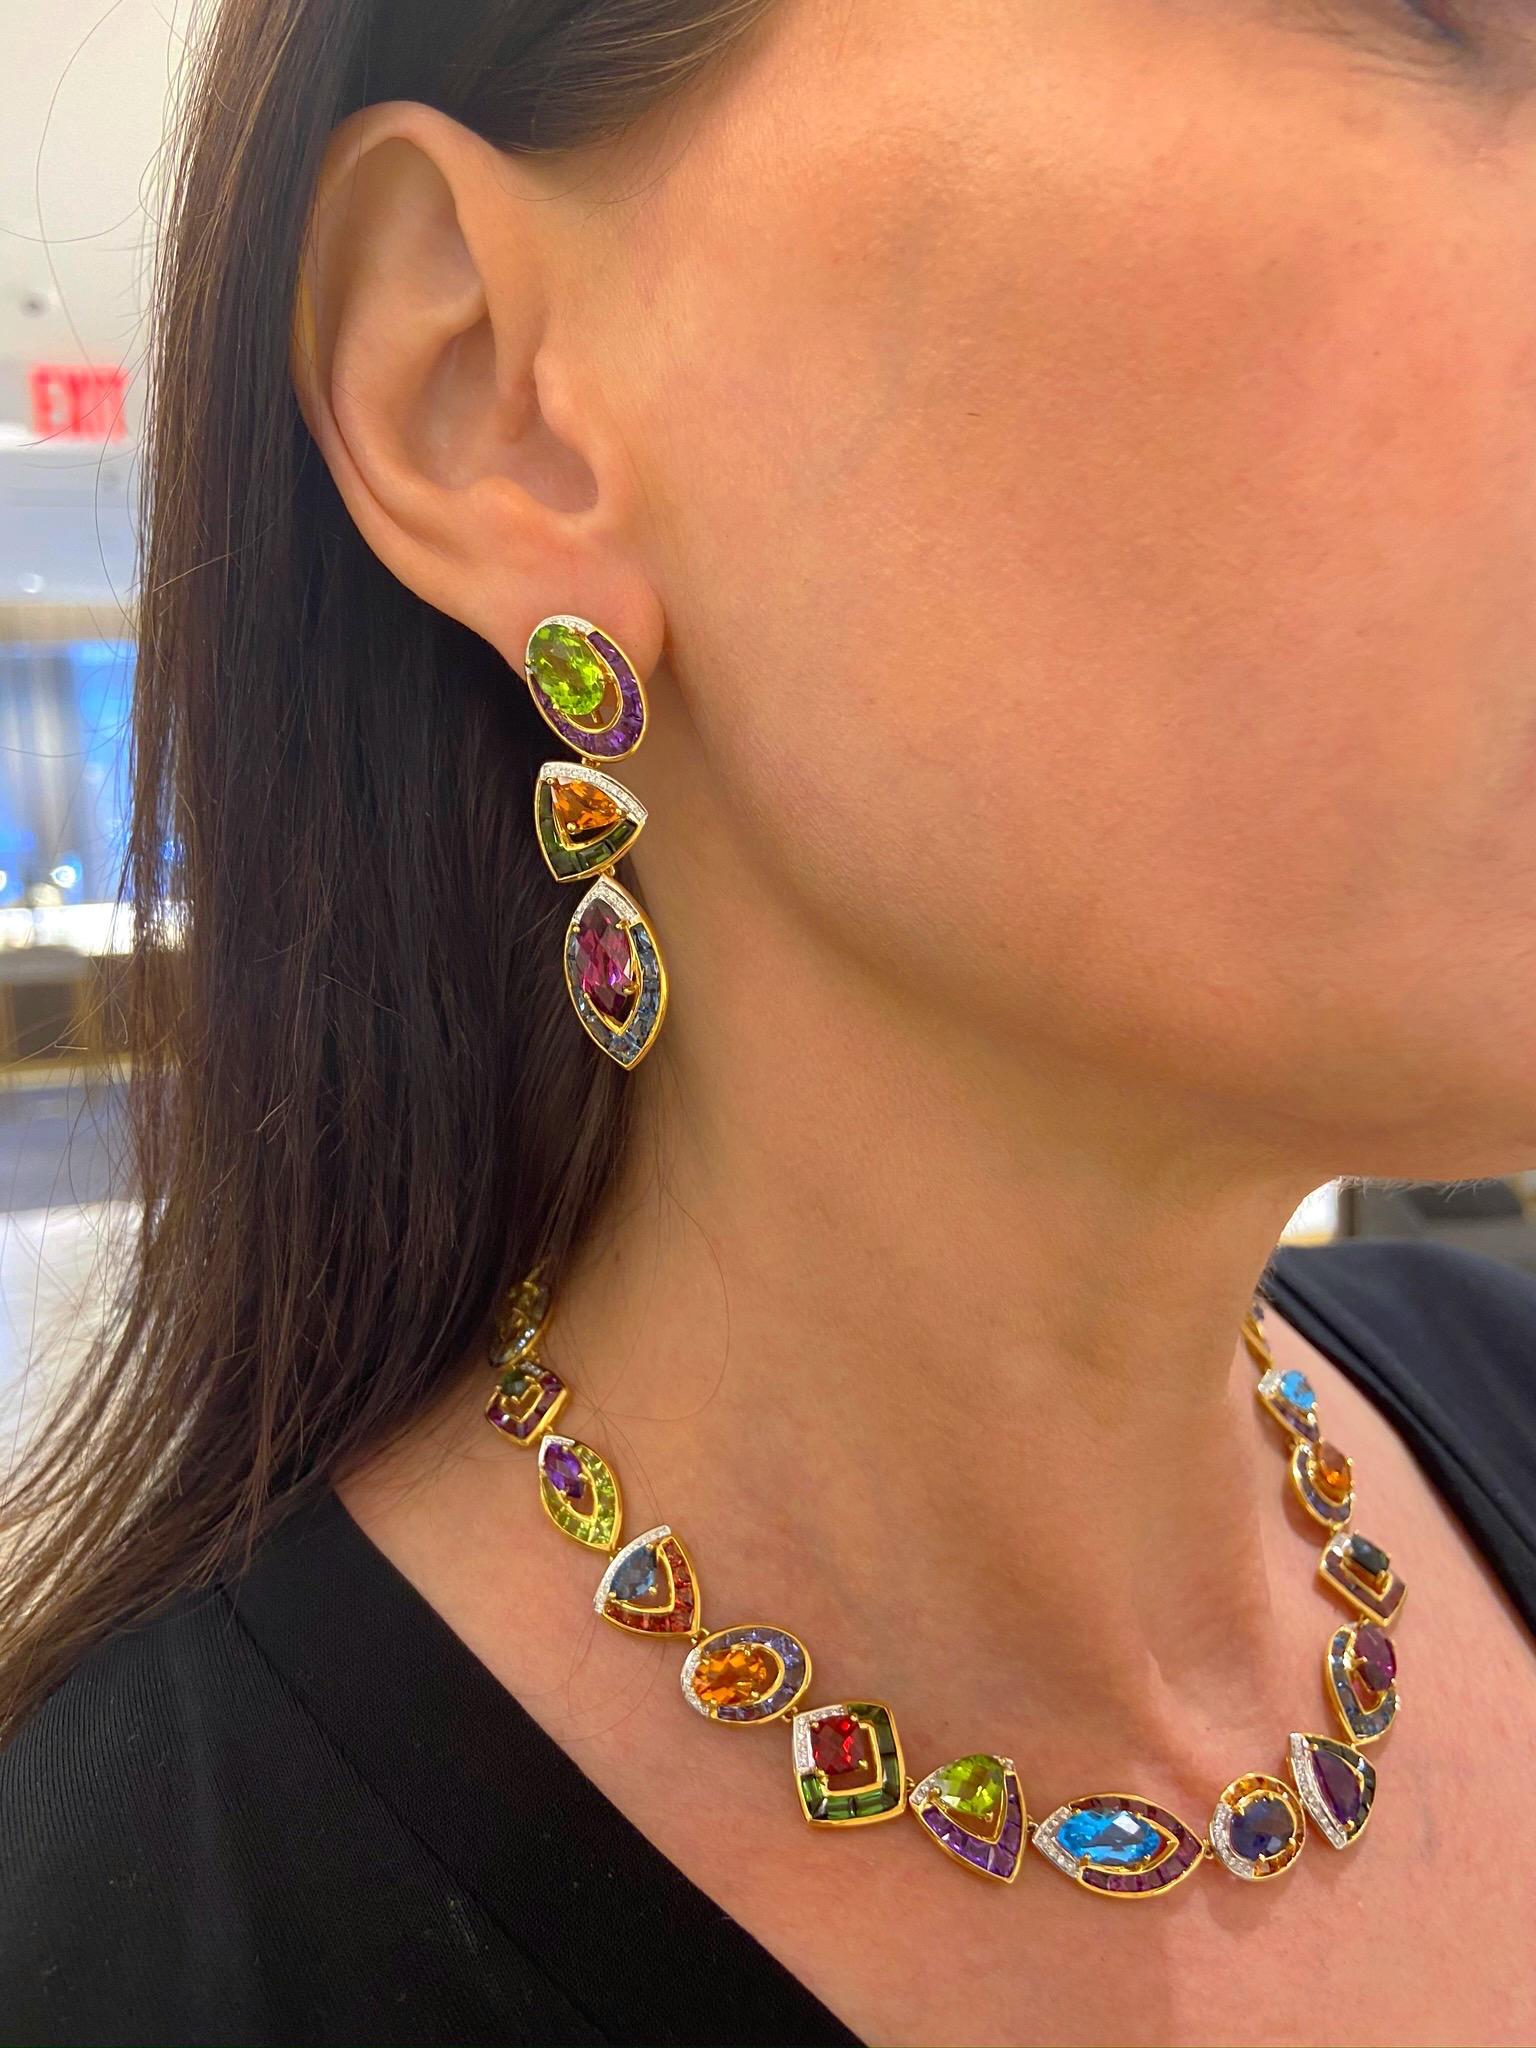 These beautiful crafted 18 karat yellow gold earring are set with an array of Semi Precious stones making them very wearable . The stones include Peridot, Citrine, Garnet, BlueTopaz, Green Tourmaline & Amethyst. Each section is accented with